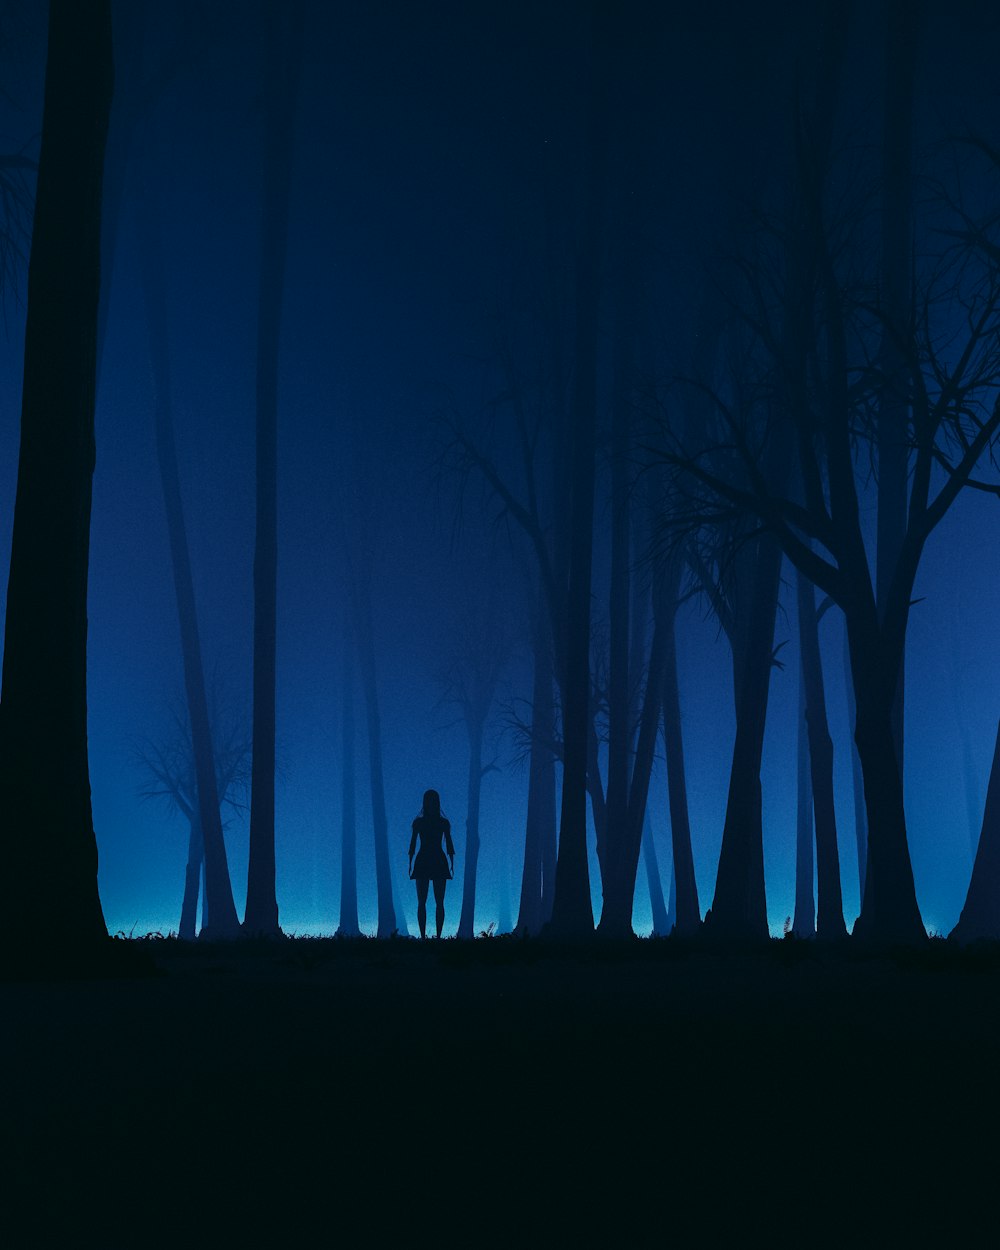 a person standing in a forest